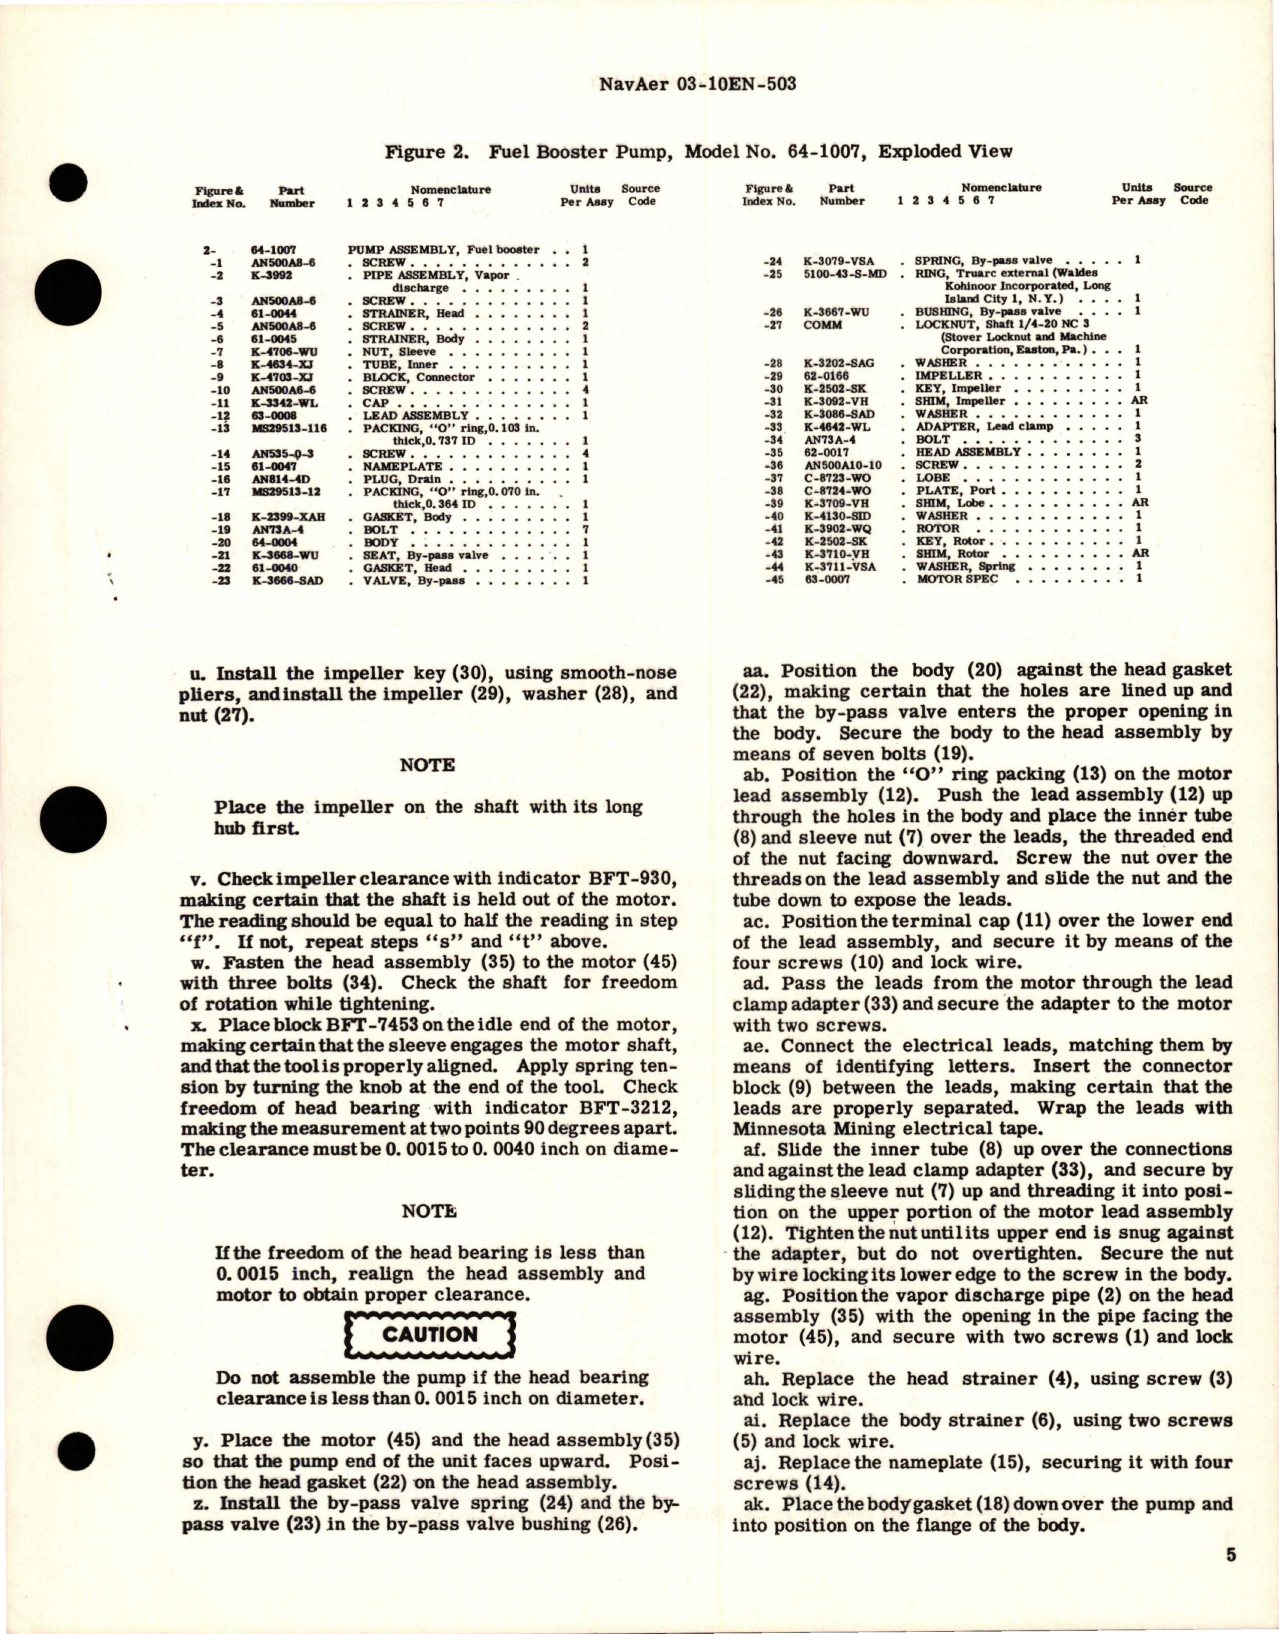 Sample page 5 from AirCorps Library document: Overhaul Instructions with Parts Breakdown for Fuel Booster Pump - Model 64-1007 